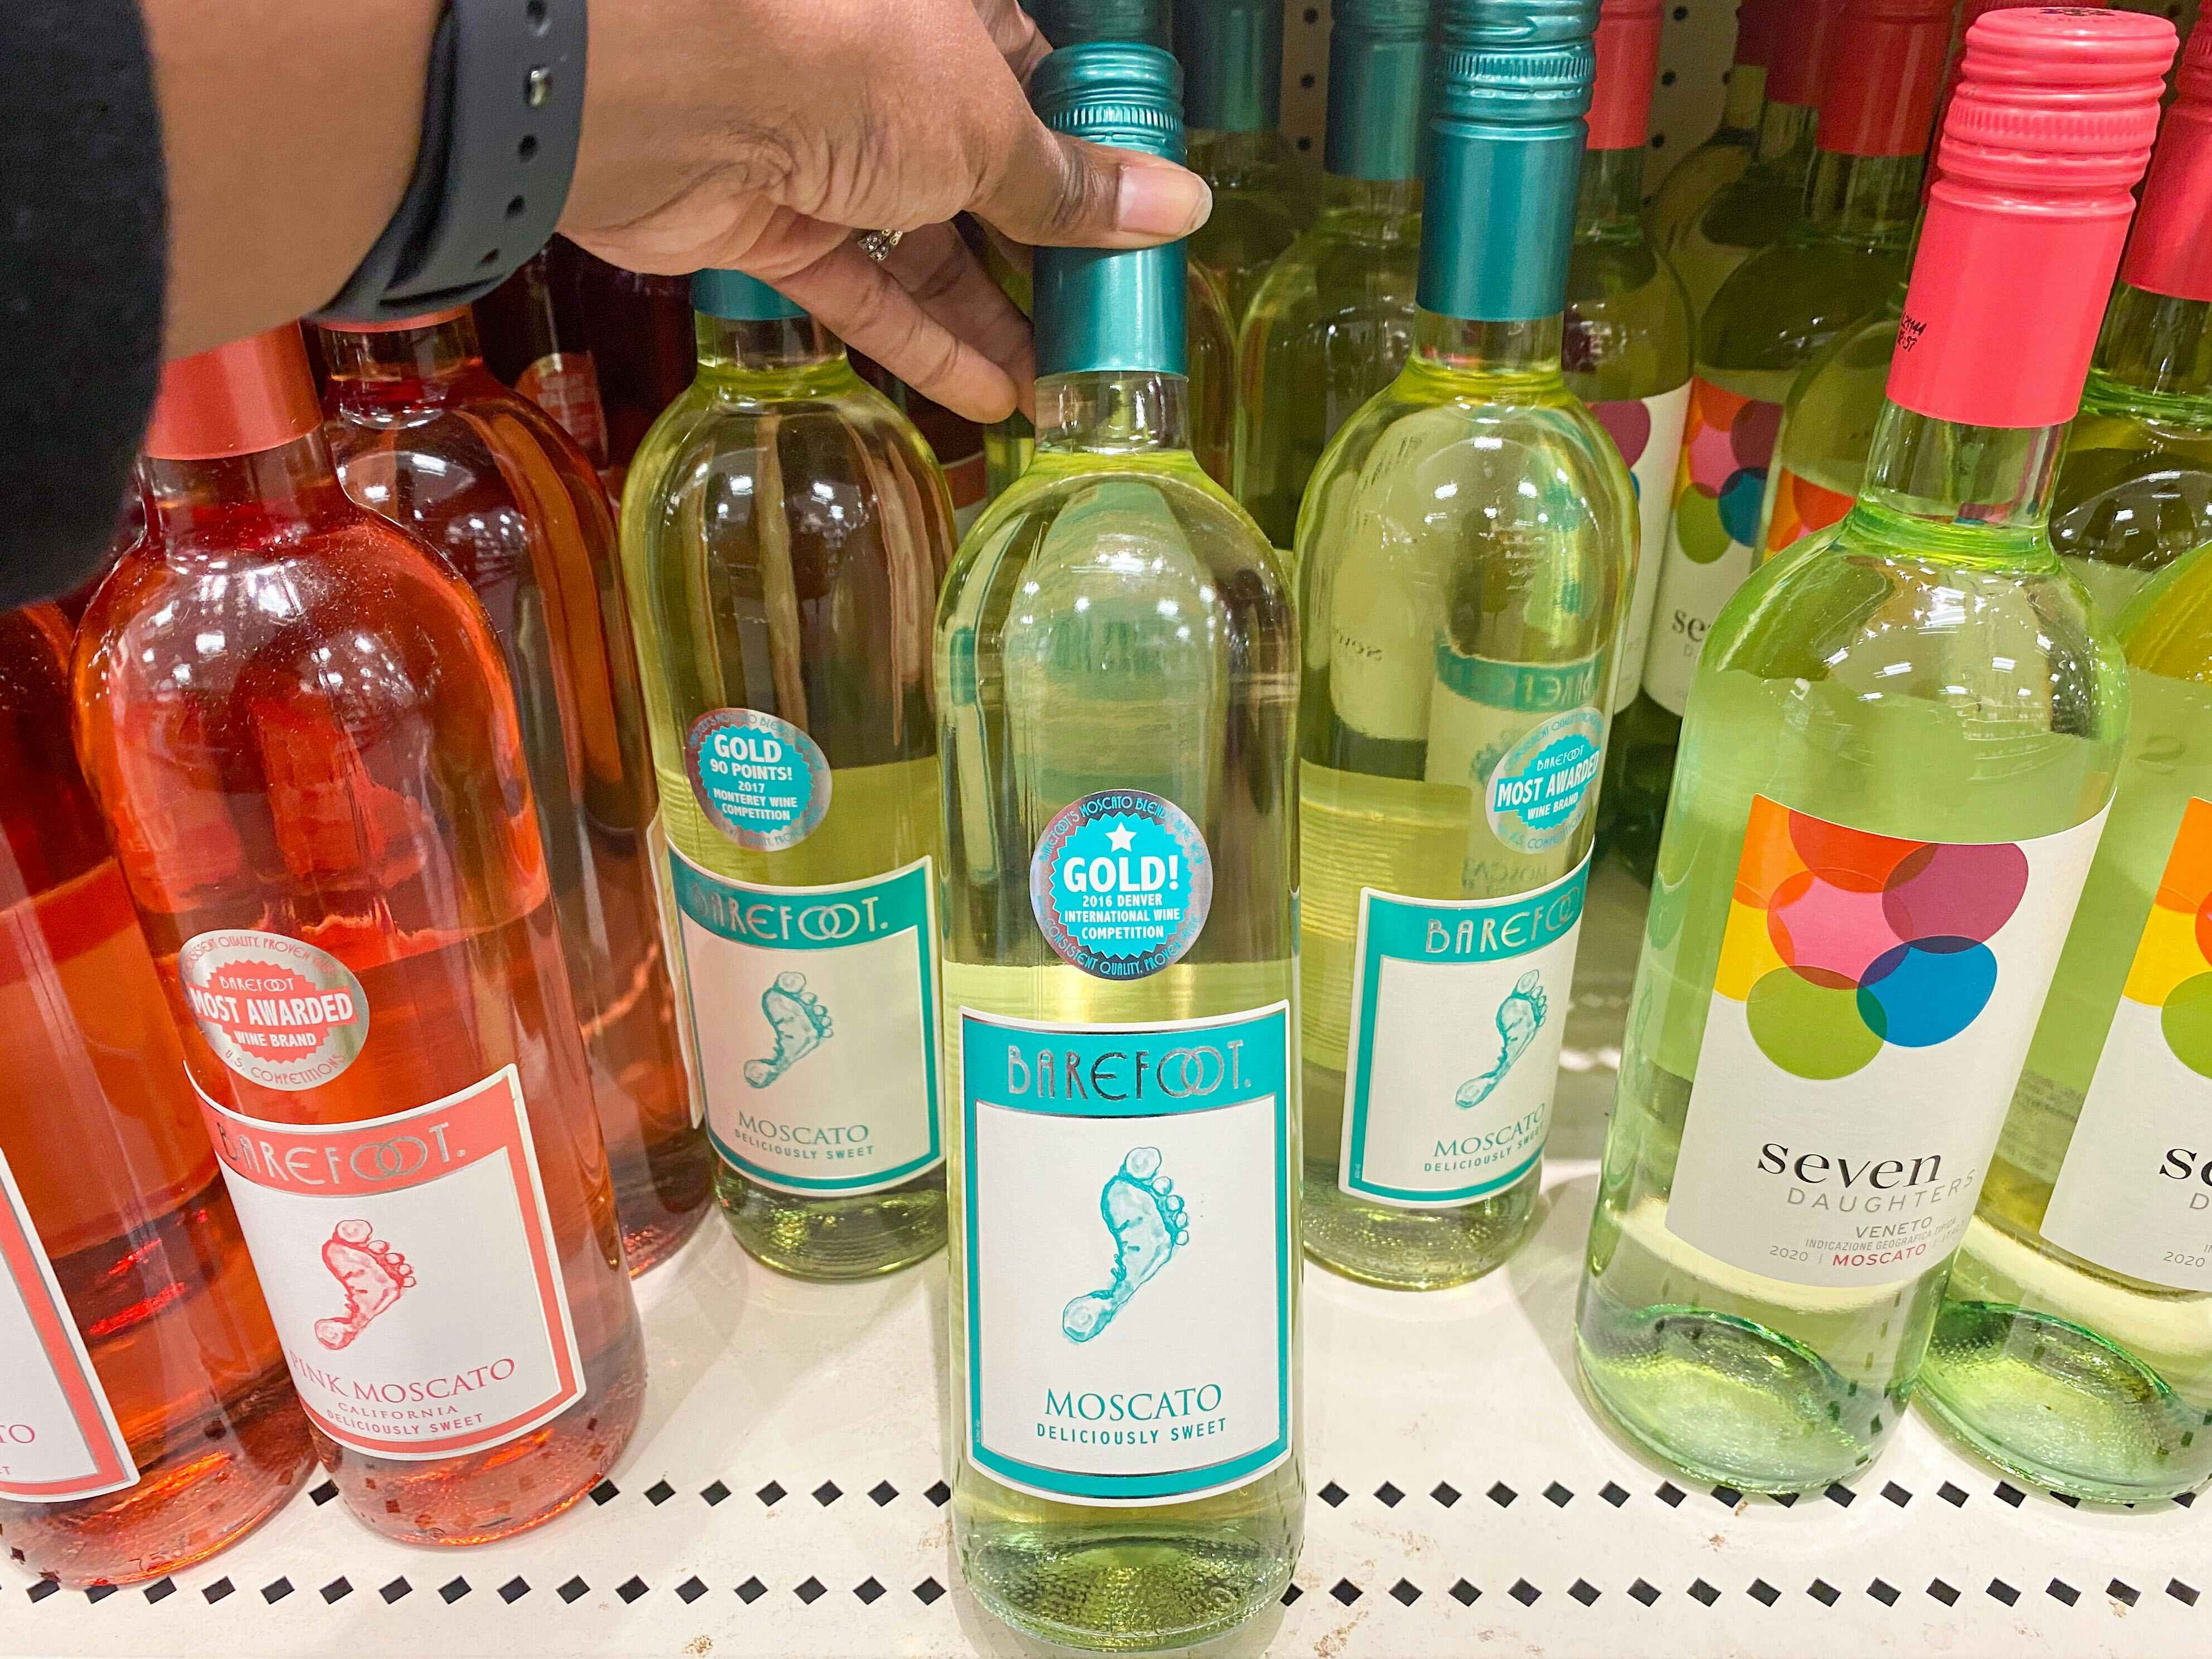 barefoot pink moscato and seven daughters wine bottles on target shelf